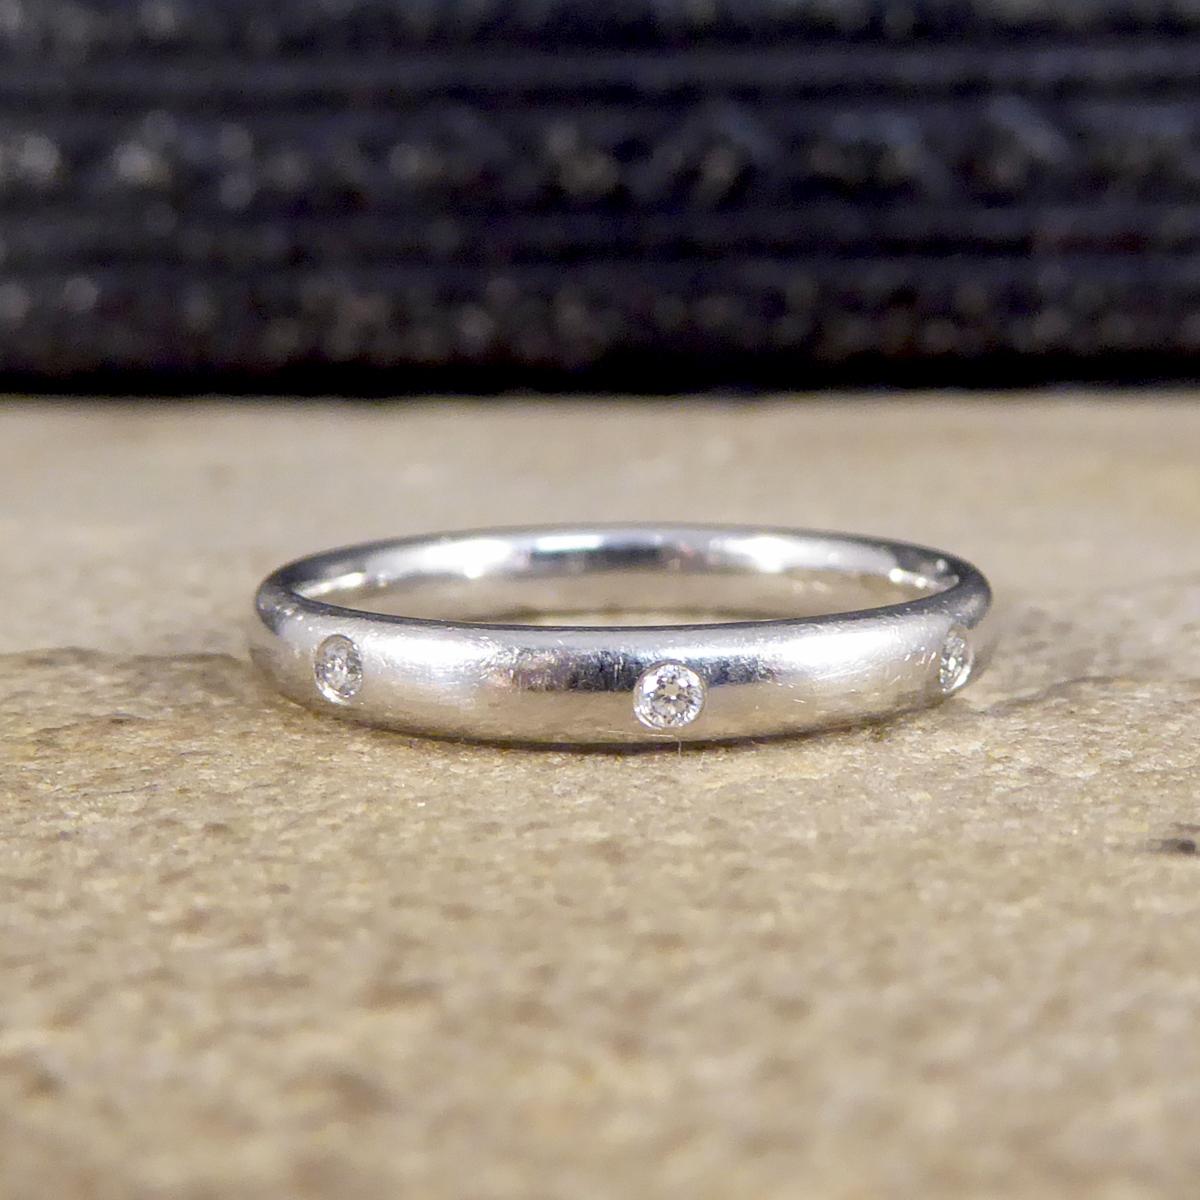 This simple vintage piece can be worn as a ring worn on any finger, or as a wedding band. It has three small Diamonds set into the head giving a minimal band a little extra special touch to it without being over the top, the perfect wedding band for